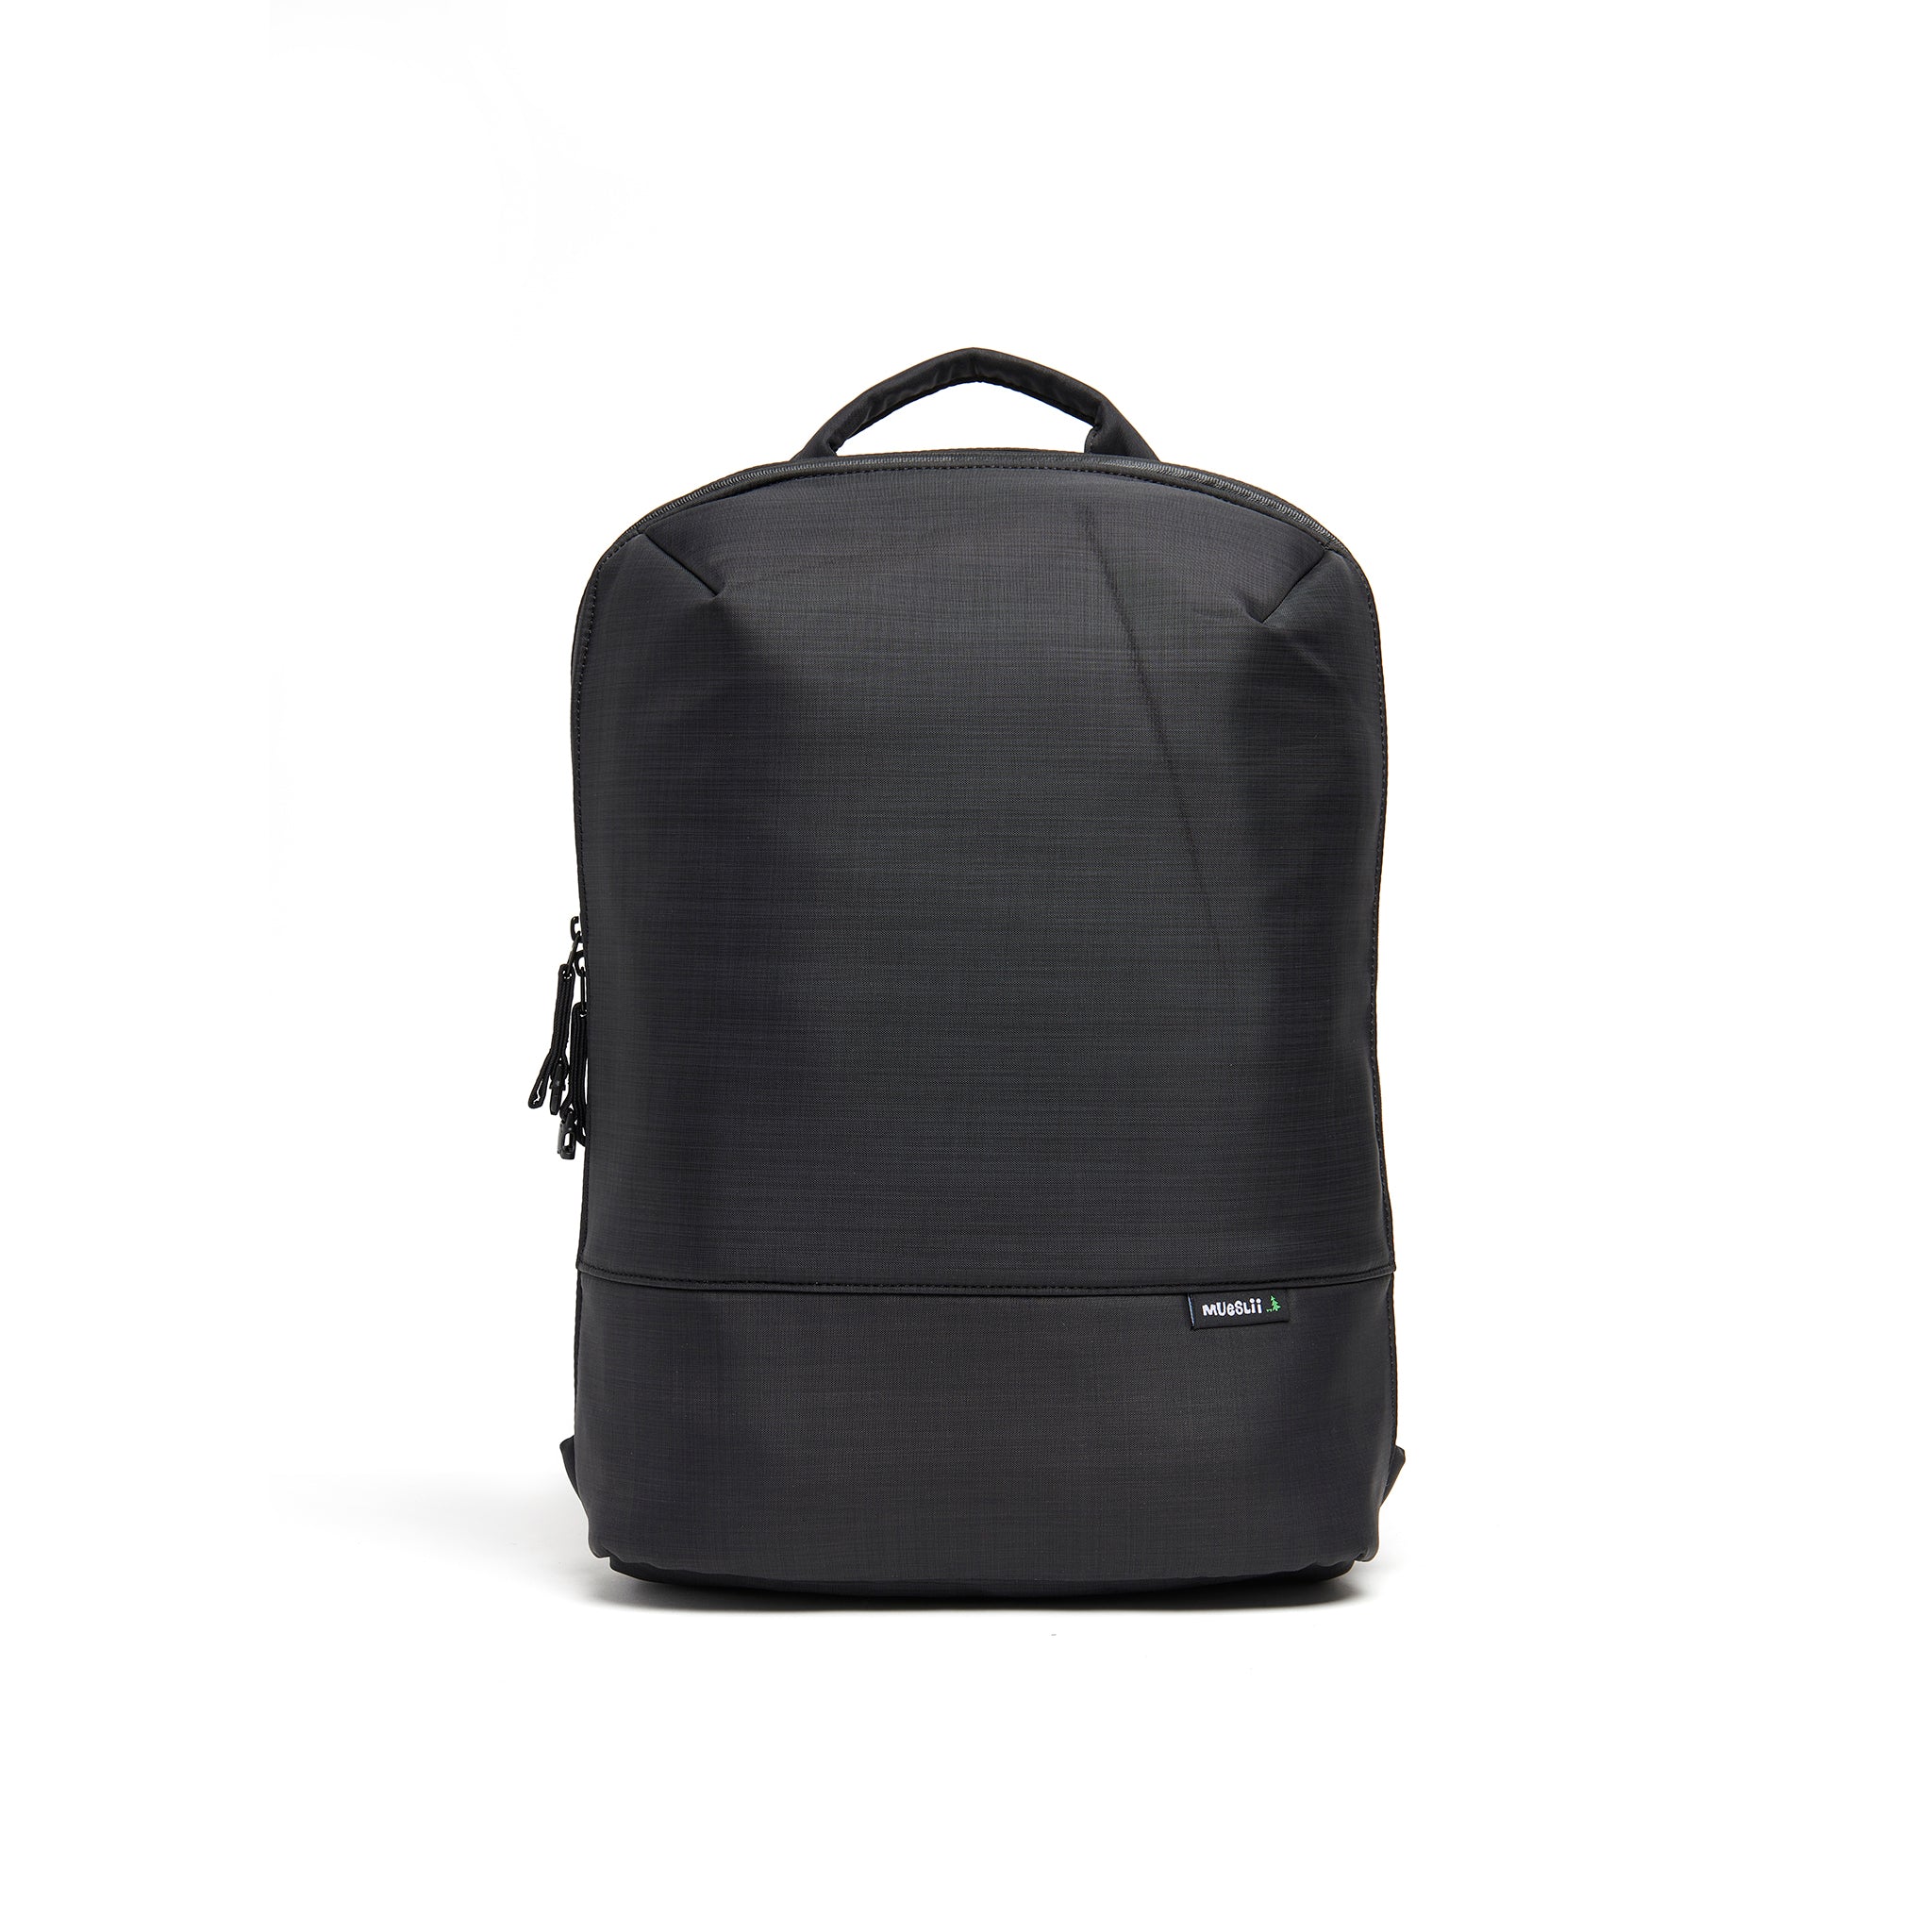 Mueslii daily backpack, made of  water resistant canvas nylon, with a laptop compartment, color night black, front view.